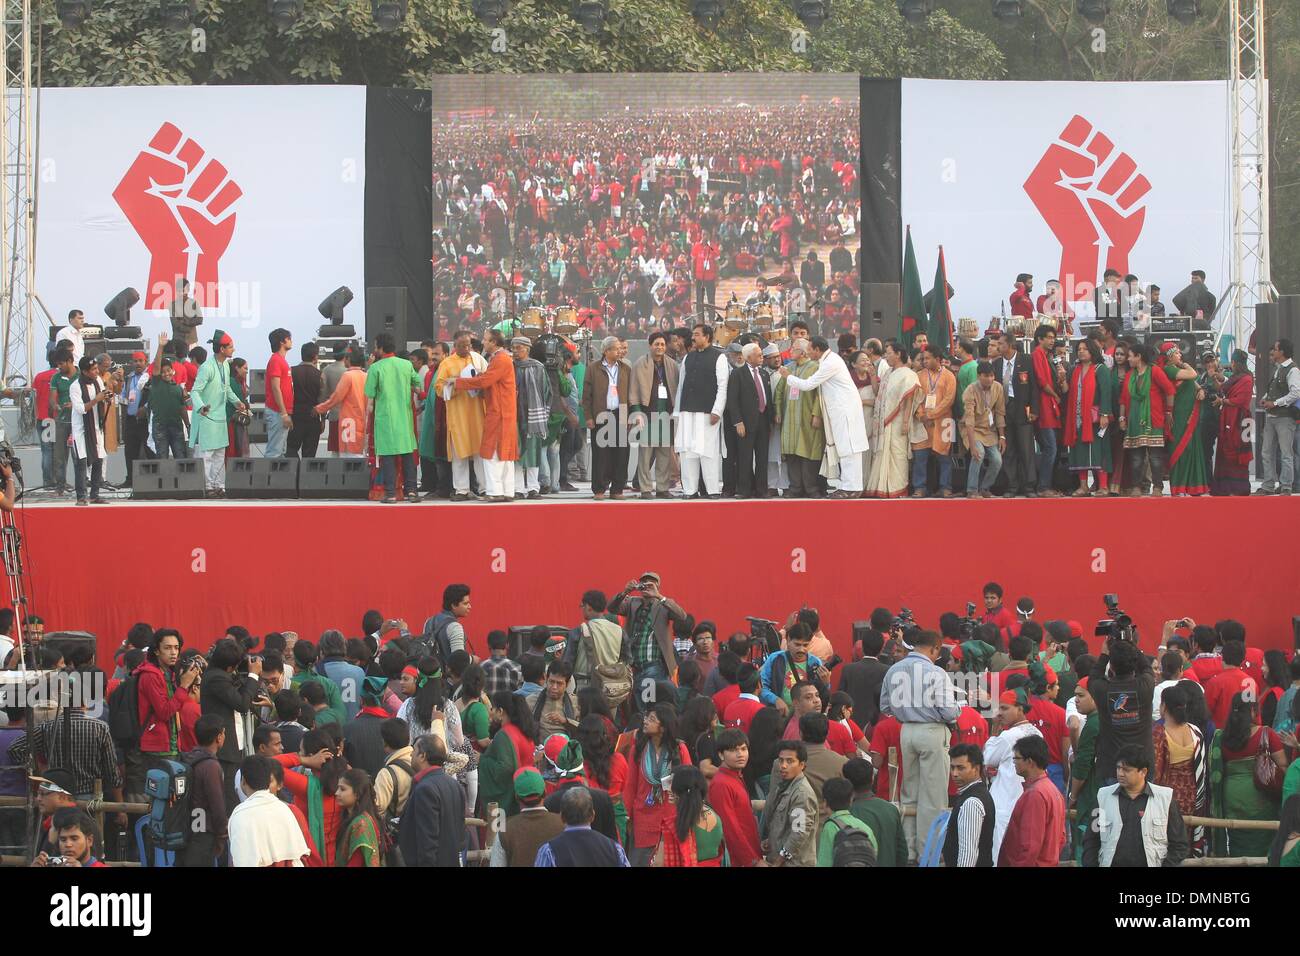 Dhaka, Bangladesh. 16th Dec, 2013. Tens of thousands of people have joined in singing Bangladesh's national anthem 'Amar sonar Bangla ami tomay bhalobasi' (My Bengal of Gold, I love you) at the Suhrawardy Udyan where the Bangalees' charter of freedom was written 42 years ago. Bangladesh won independence from Pakistan after a bitter nine-month war in 1971 led by the country's founder Sheikh Mujibur Rahman, and this is celebrated every year on December 16. Credit:  Monirul Alam/ZUMAPRESS.com/Alamy Live News Stock Photo